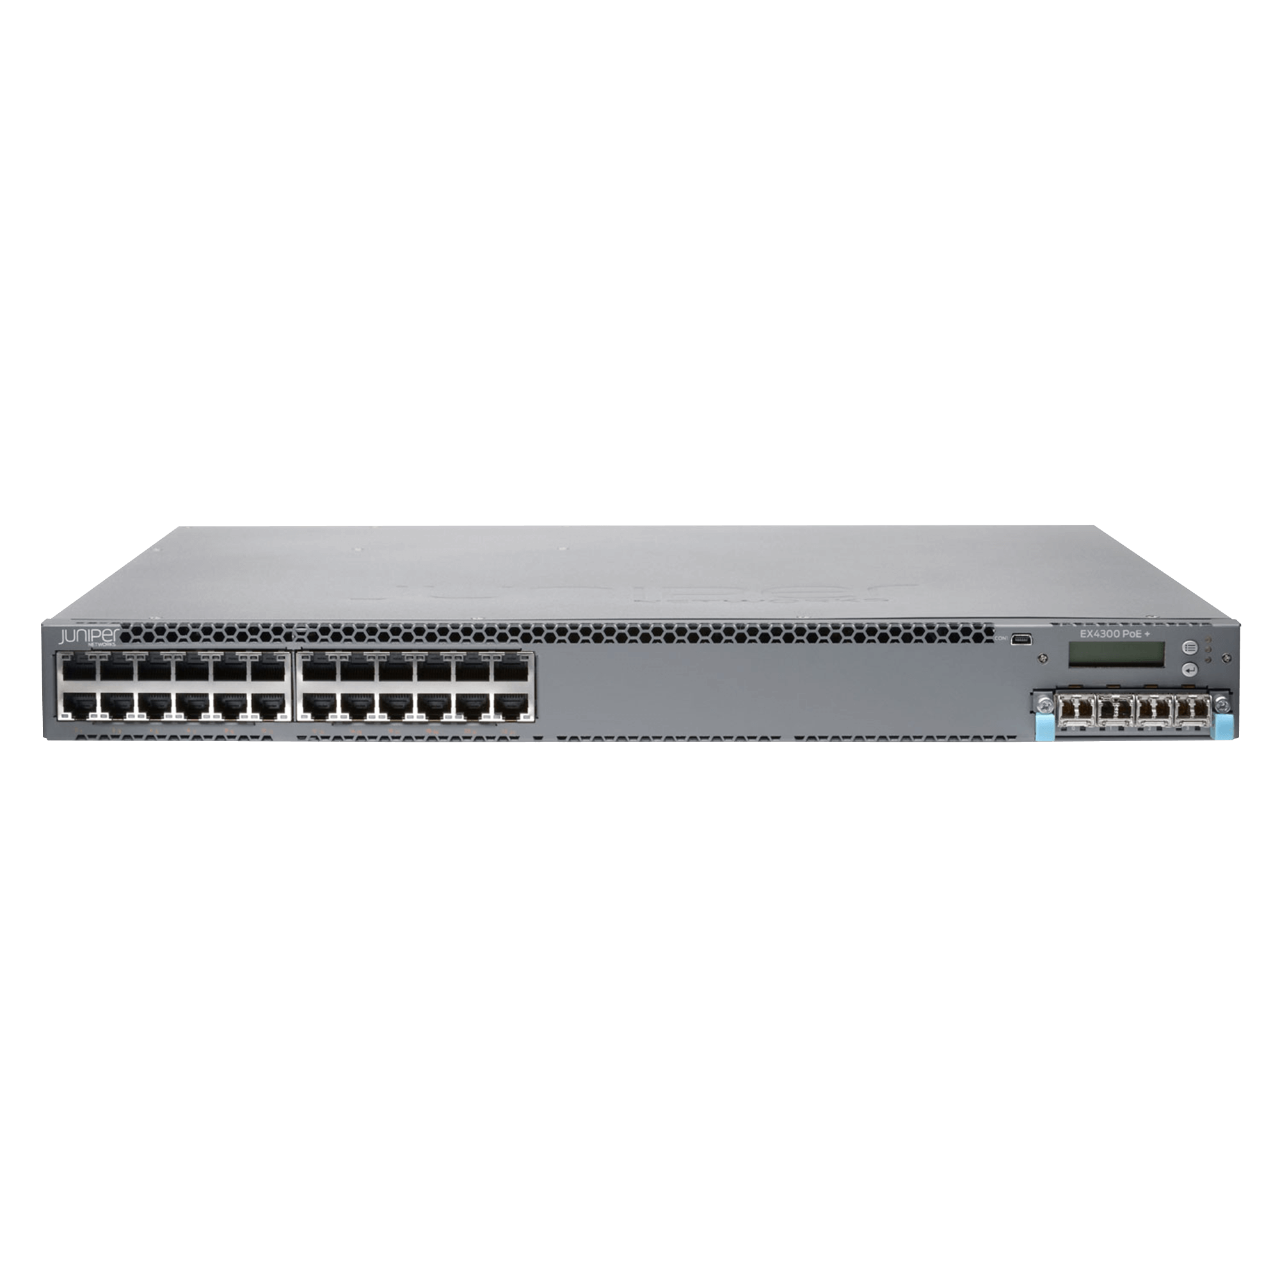 Used Juniper EX4300-48P Ethernet Layer 3 Switch 48 Ports Manageable Compact  Finless SW F/ EX2200-CW/ 12 Port Expansion Slots Extensible Authentication  Protocol (EAP) 1 Year Warranty 